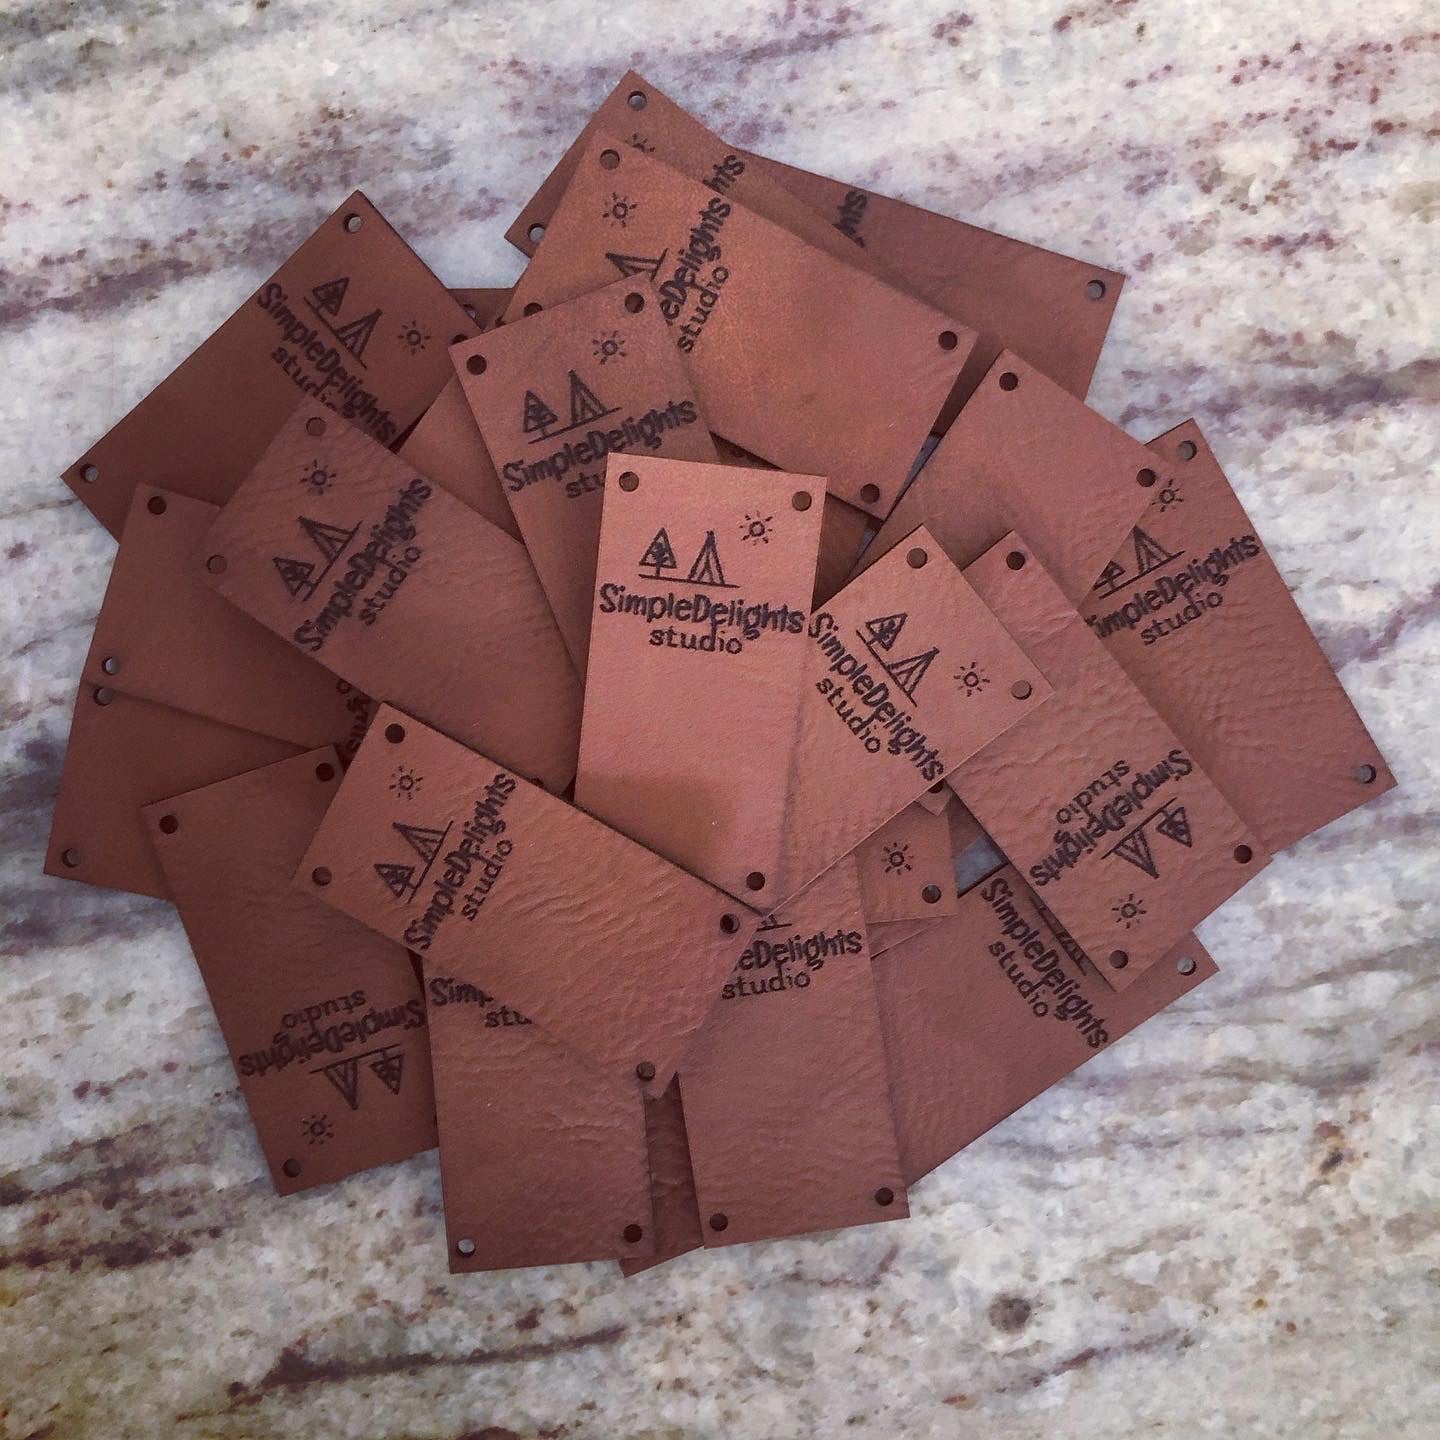 Labels for handmade items, leather tags for handmade items, crochet labels,  leather tags for crochet, knitting lab…